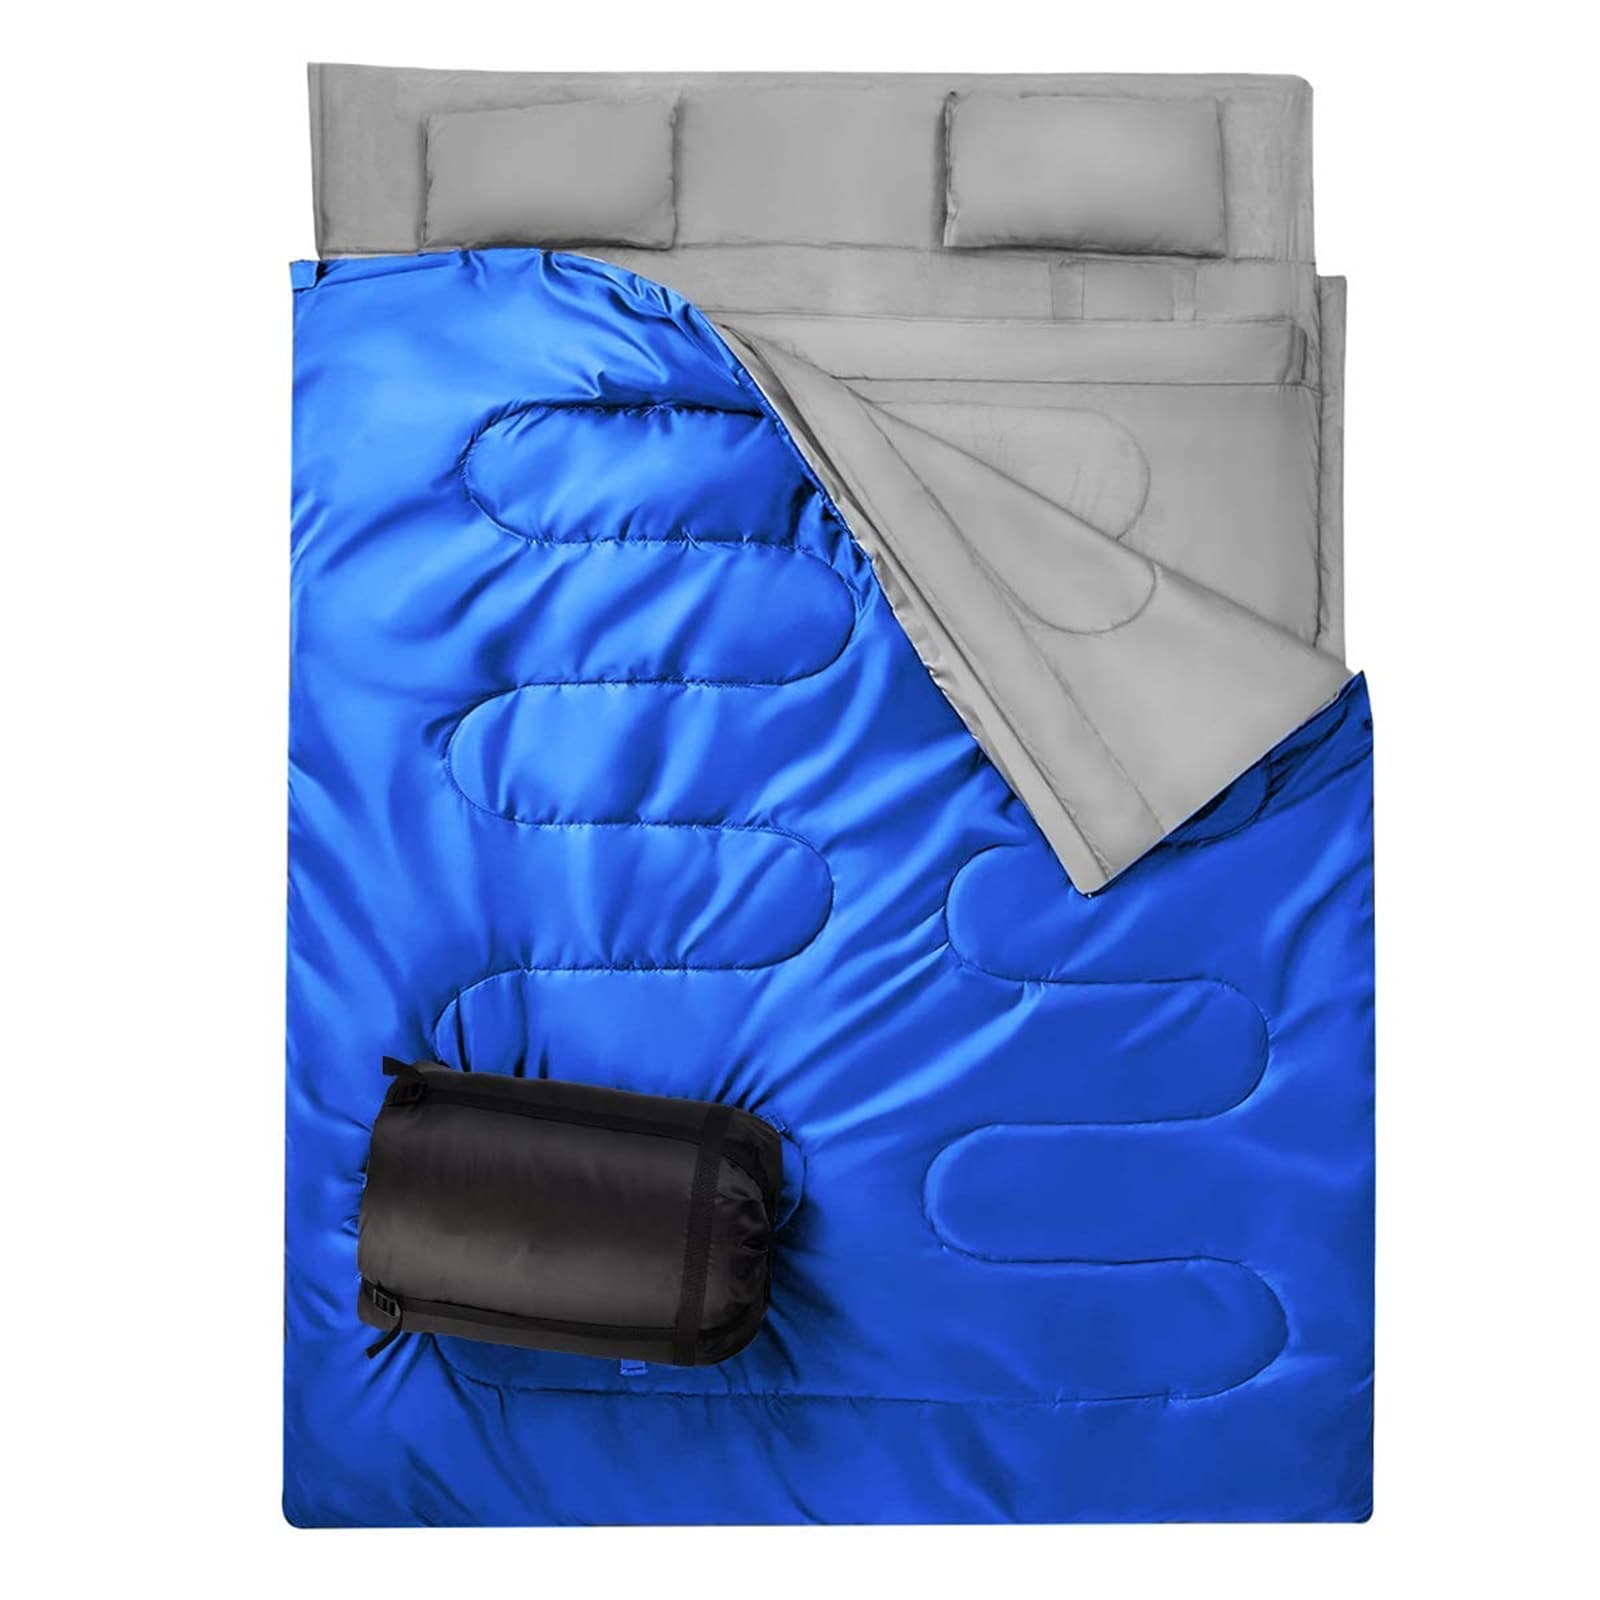 Spoonbill UL 2 Person Sleeping Bag – Feathered Friends